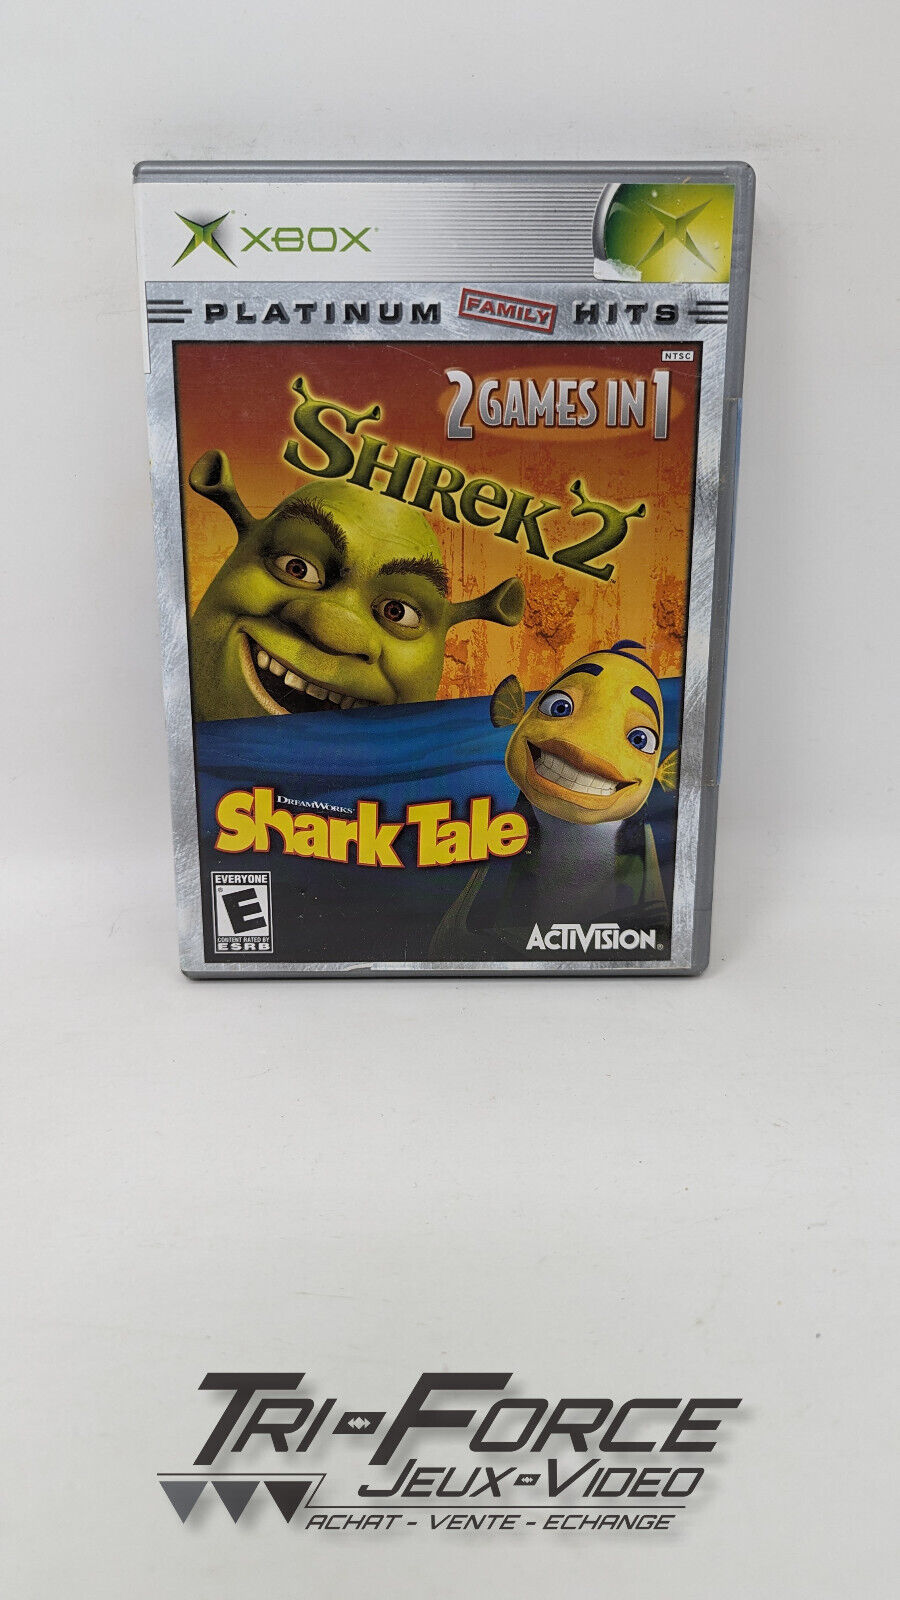 Shrek 2/Shark Tale CIB Complete game for Xbox tested & Free shipping